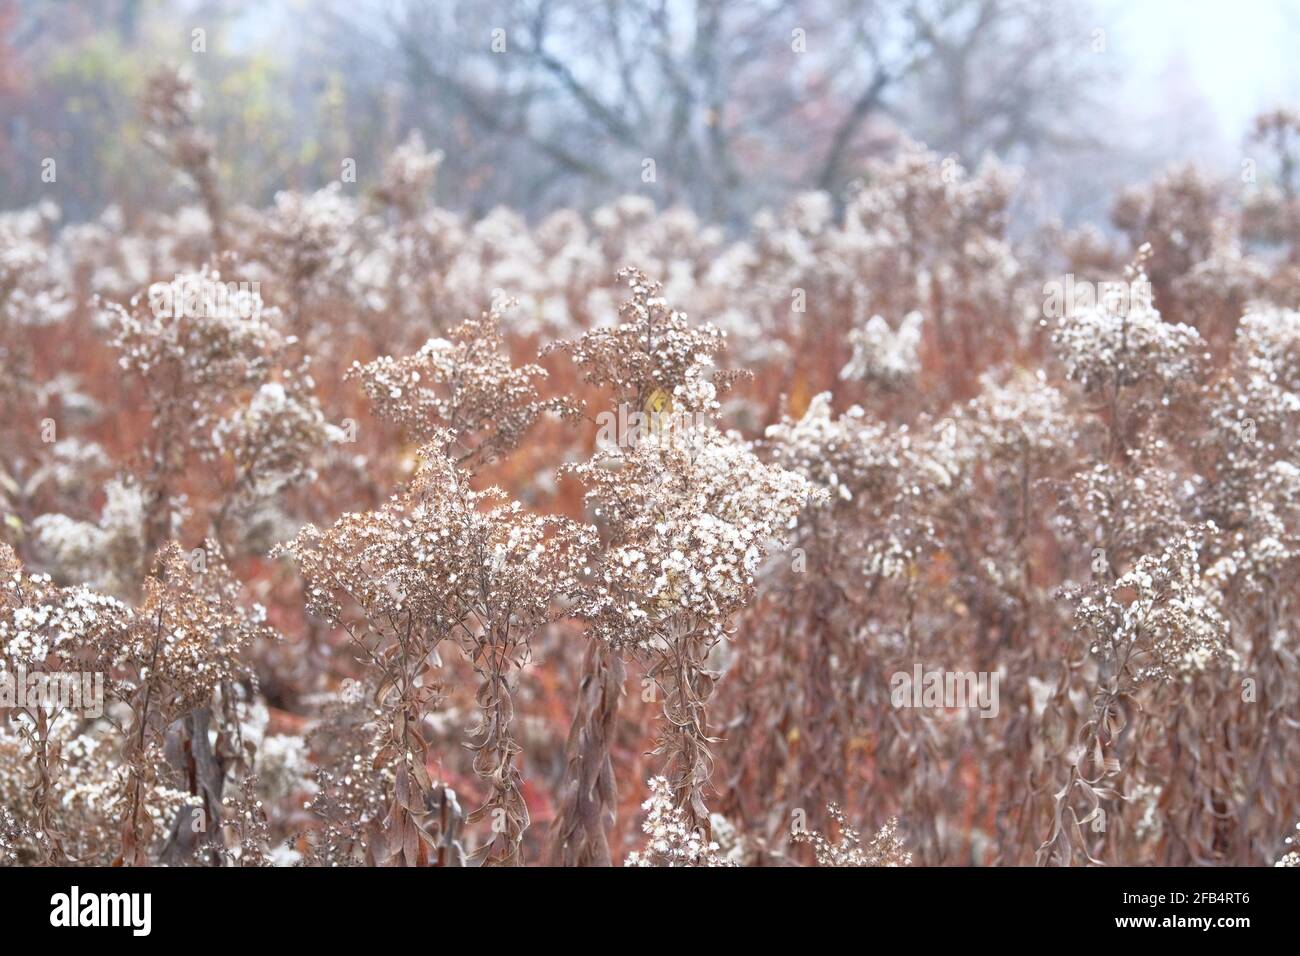 Fabulous autumn nature. Dry brown grass in autumn in November, warm weather. Stock Photo